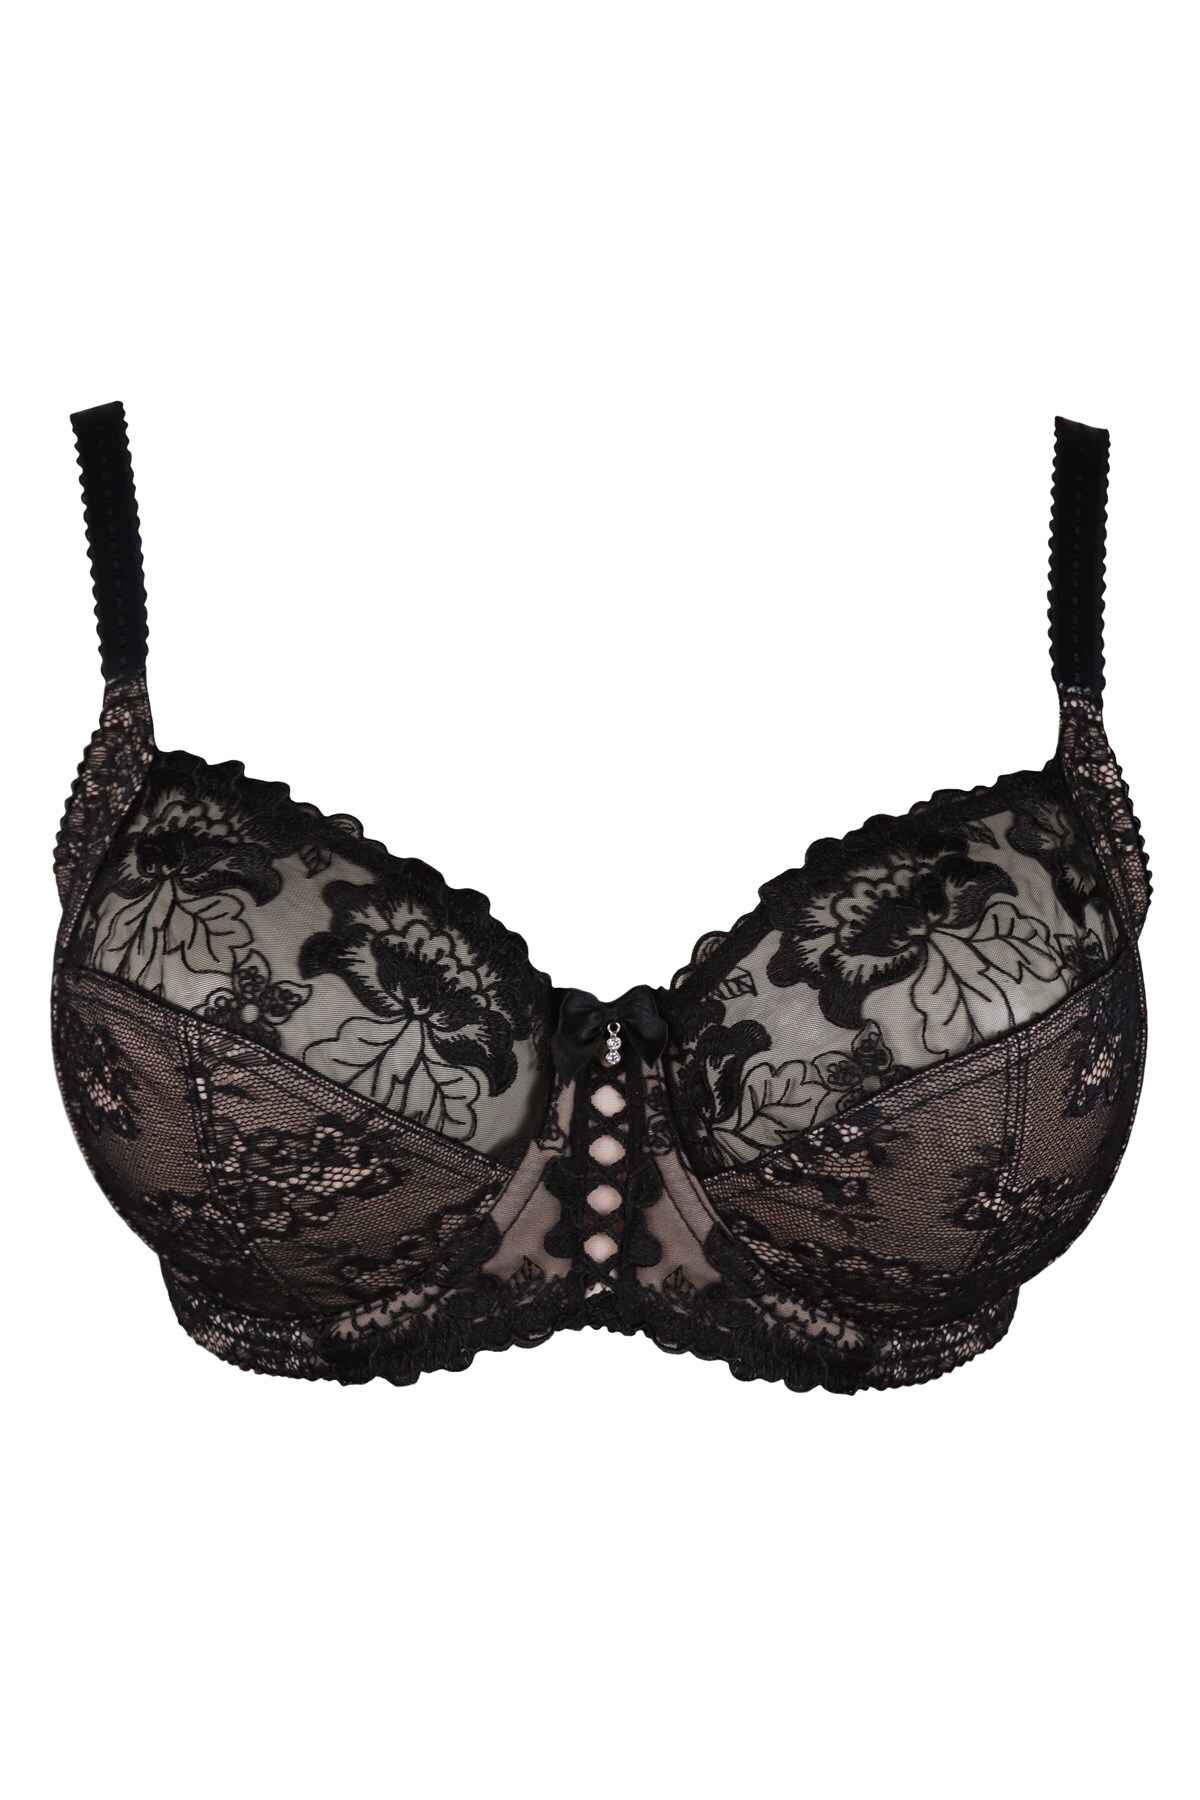 Pour Moi Signature Underwired Full Cup Bra Black, White or Slate 30-40 DD-J